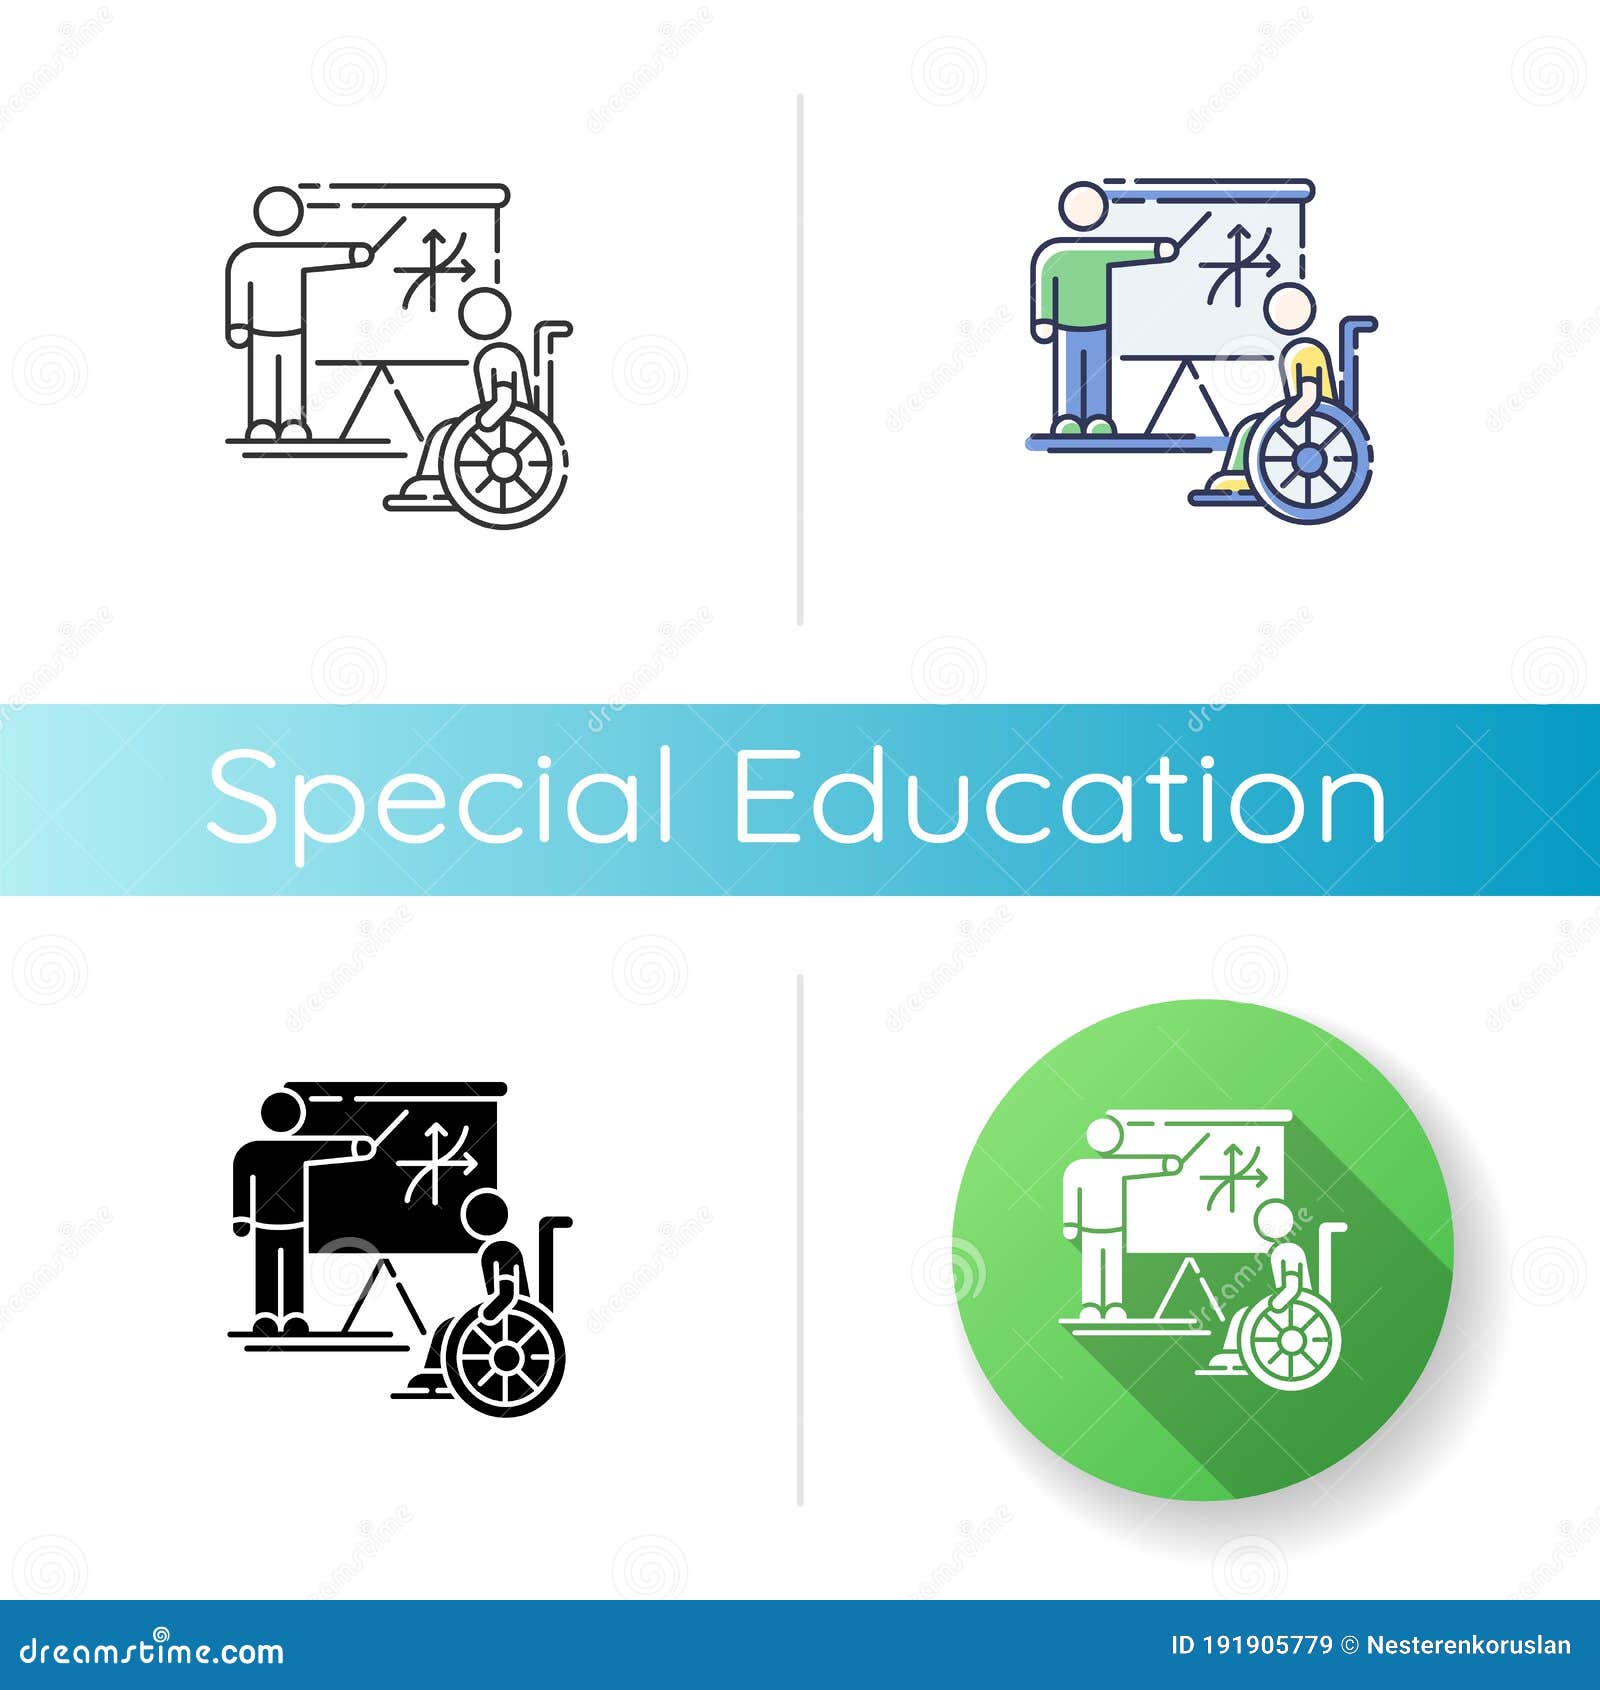 News | European Agency for Special Needs and Inclusive Education